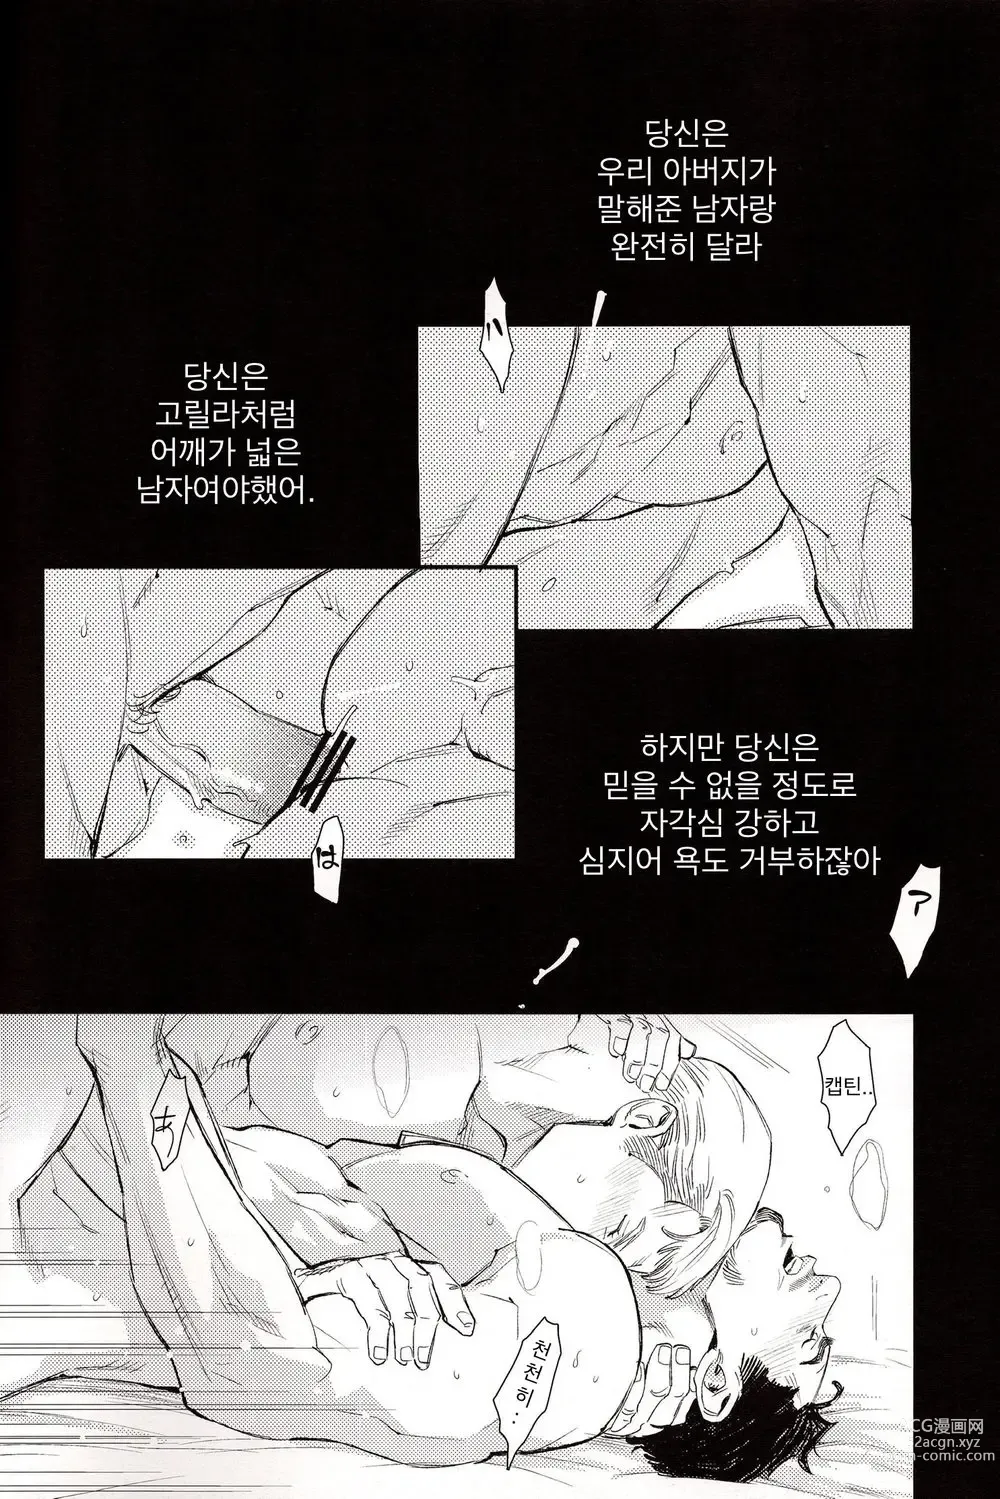 Page 14 of doujinshi Daydream - 백일몽